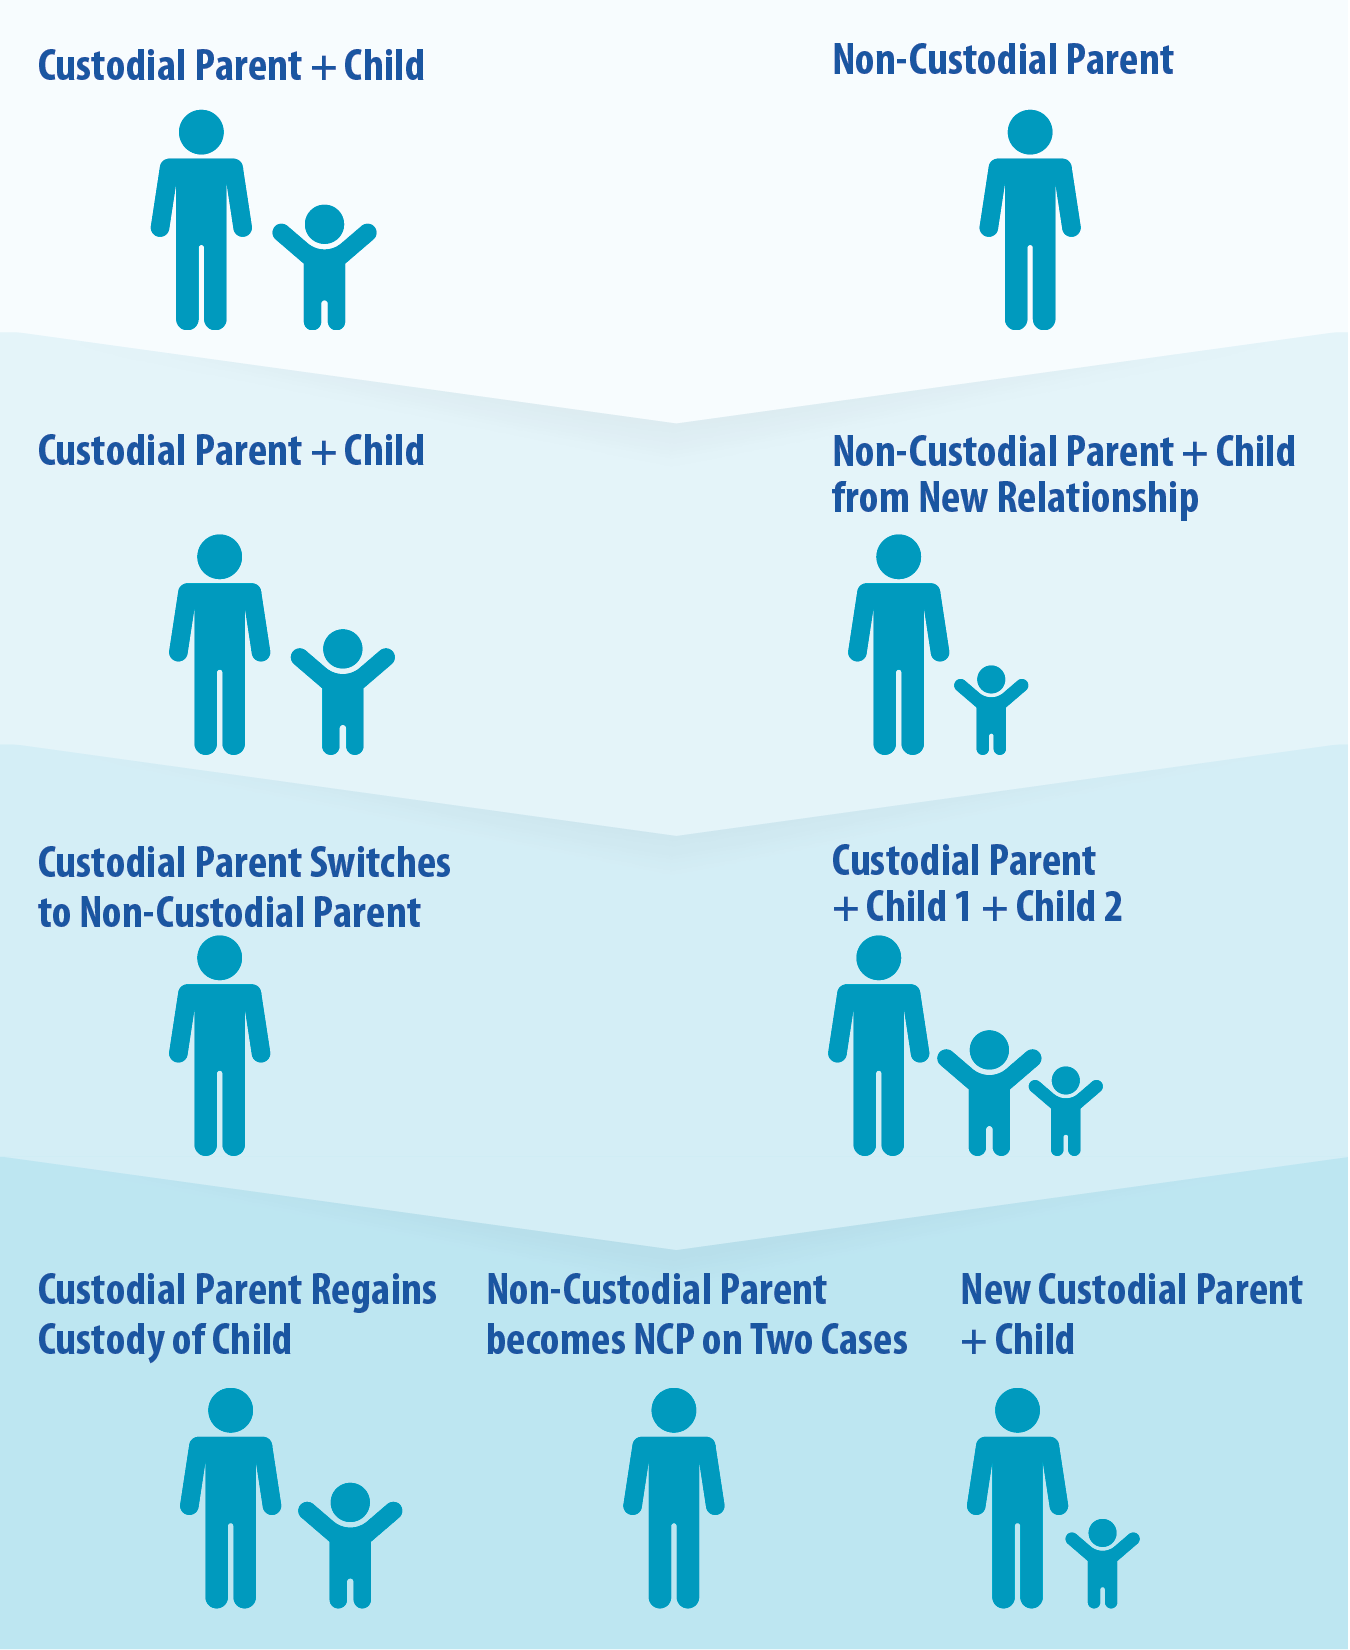 This graphic consists of four, horizontal chevrons stacked on top of each other showcasing family changes. On the left side of the top chevron, icons of an adult and child stand underneath the label "Custodial Parent and Child." On the right side of the top chevron, an icon of an adult stands underneath the label "Non-Custodial Parent." On the left side of the second chevron, icons of an adult and child stand underneath the label "Custodial Parent and Child." On the right side of this second chevron, icons of an adult and child stand underneath the label "Non-Custodial Parent + Child from New Relationship." On the left side of the third chevron, an icon of an adult stands underneath the label "Custodial Parent Switches to Non-Custodial Parent." On the right side of the third chevron, icons of an adult and two children stand underneath the label "Custodial Parent + Child 1 + Child 2." On the left side of the bottom chevron, icons of an adult and child stand underneath the label "Custodial Parent Regains Custody of Child." In the middle of the bottom chevron, an icon of an adult stands underneath the label "Non-Custodial Parent becomes NCP on Two Cases." On the right side of the bottom chevron, icons of an adult and child stand underneath the label "New Custodial Parent + Child."